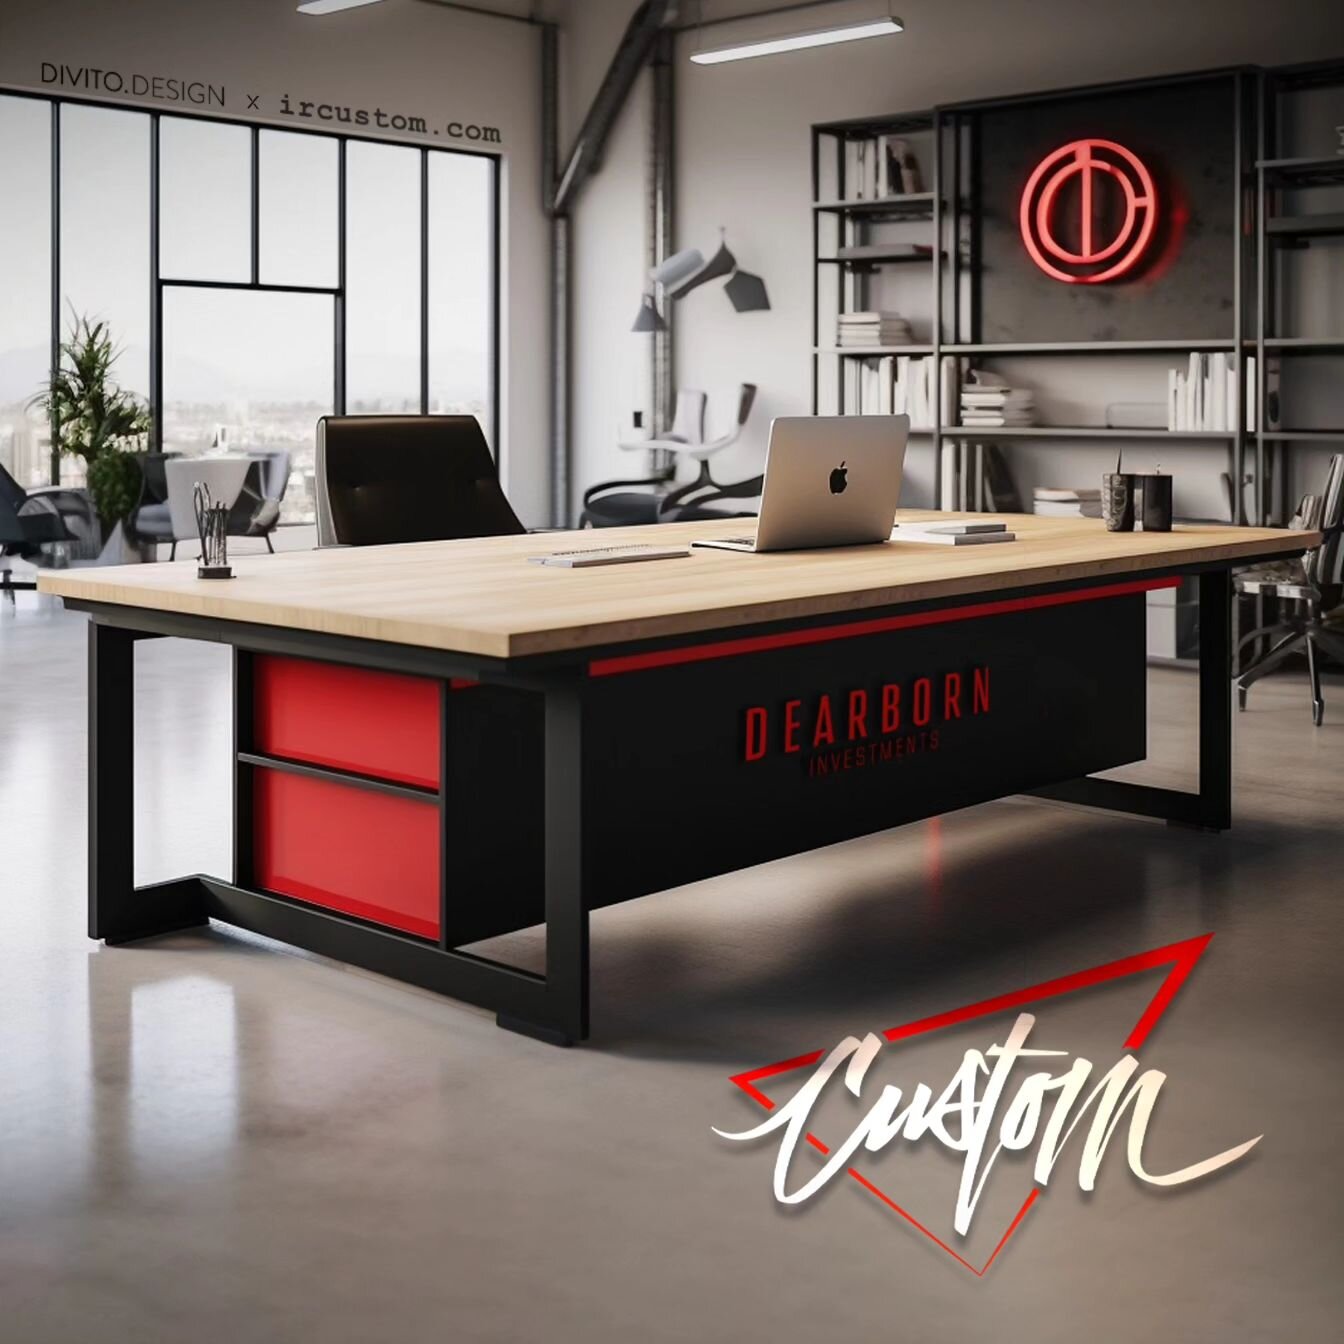 Custom Reception Desks that are as unique as YOUR business. 🤩 

Designed and built for each client in the USA. 🇺🇸

iRcustom.com 

#customfurniture #uniquedesigns #madeinUSA #receptiondesk #officeinspiration #moderninterior #modernoffice #interiord